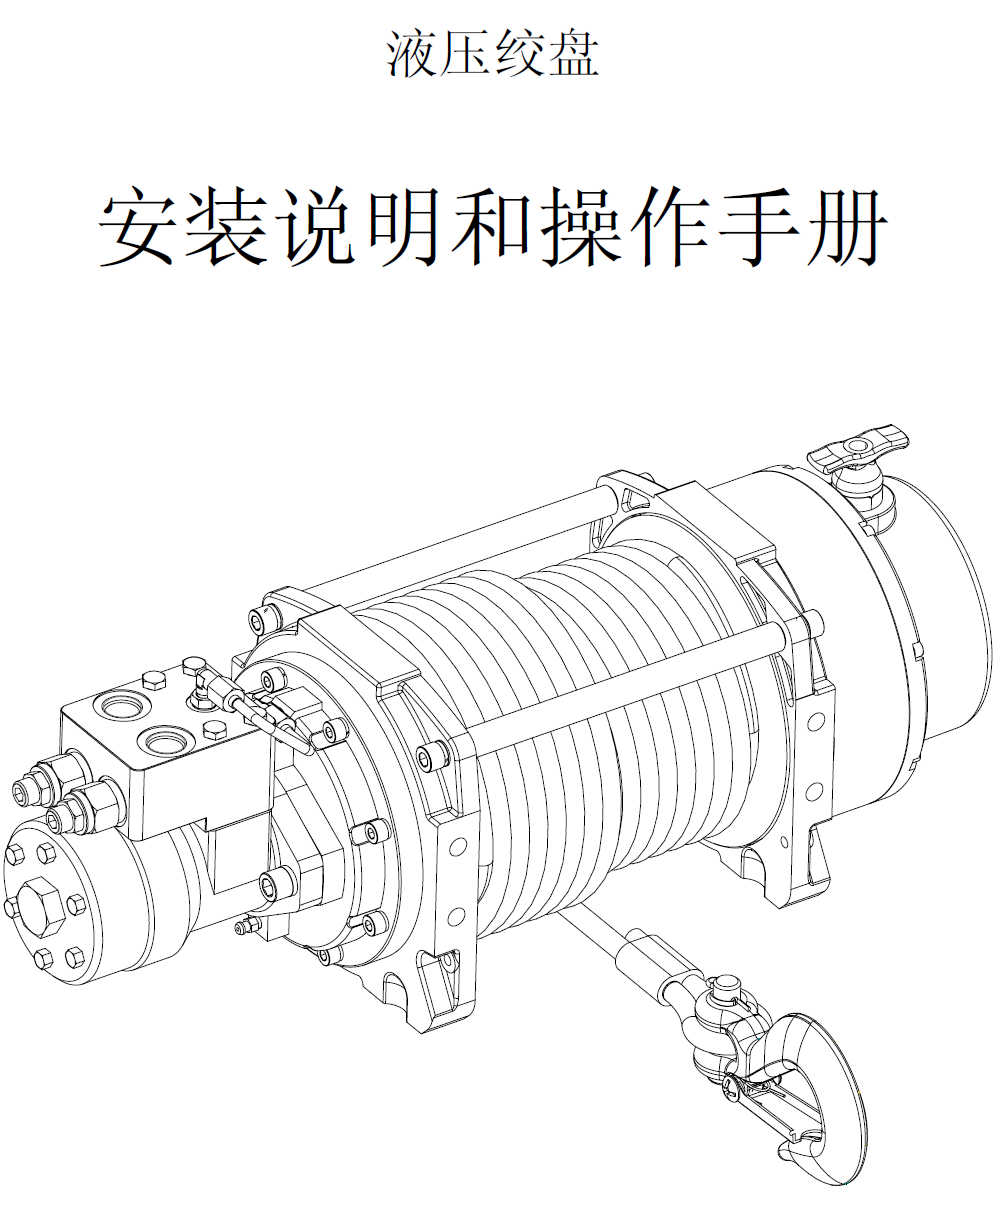 12000-22000LBS hydraulic winches made in china.png